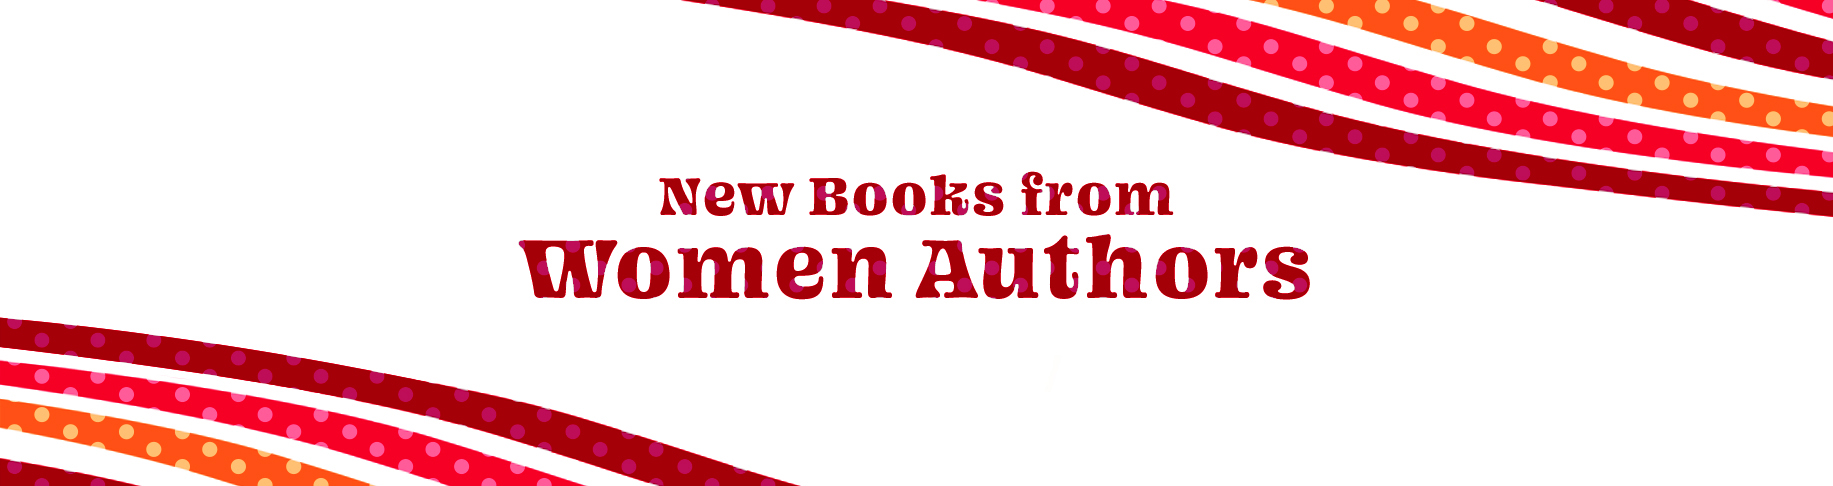 New Books from Women Authors